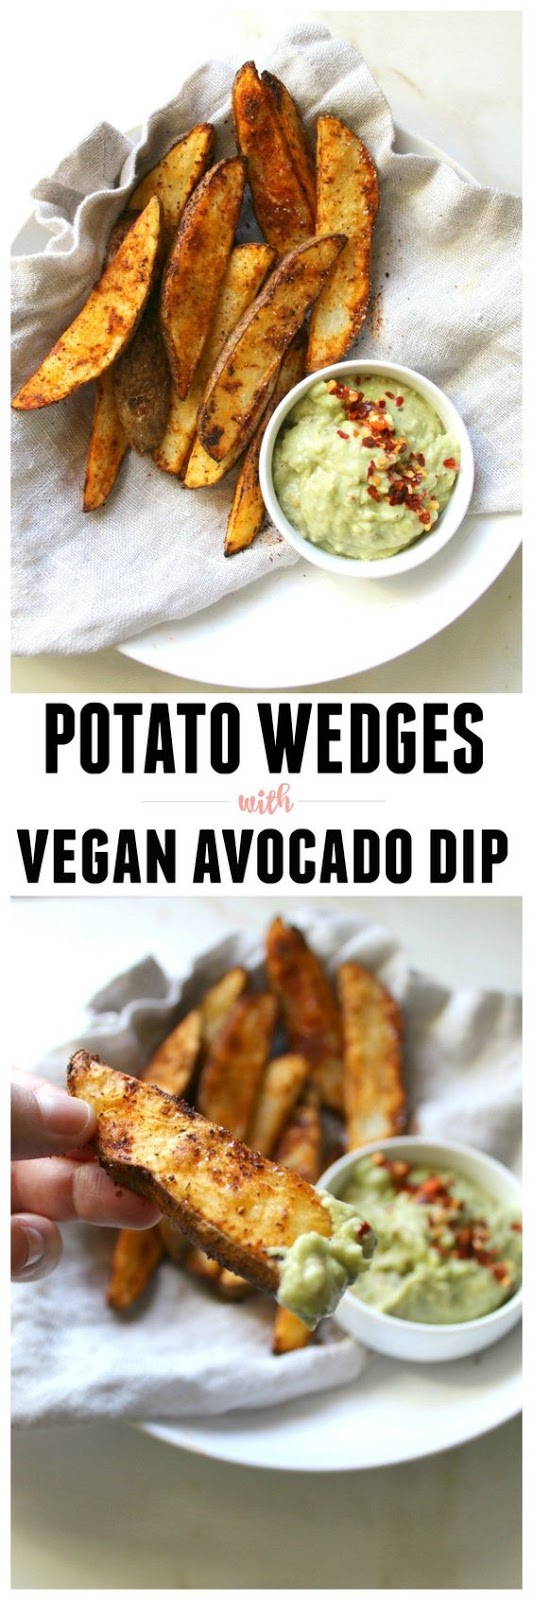 These Potato Wedges with Vegan Avocado Dip are the perfect snack for two or meal for one. Lightly oiled and baked keeps these low fat.